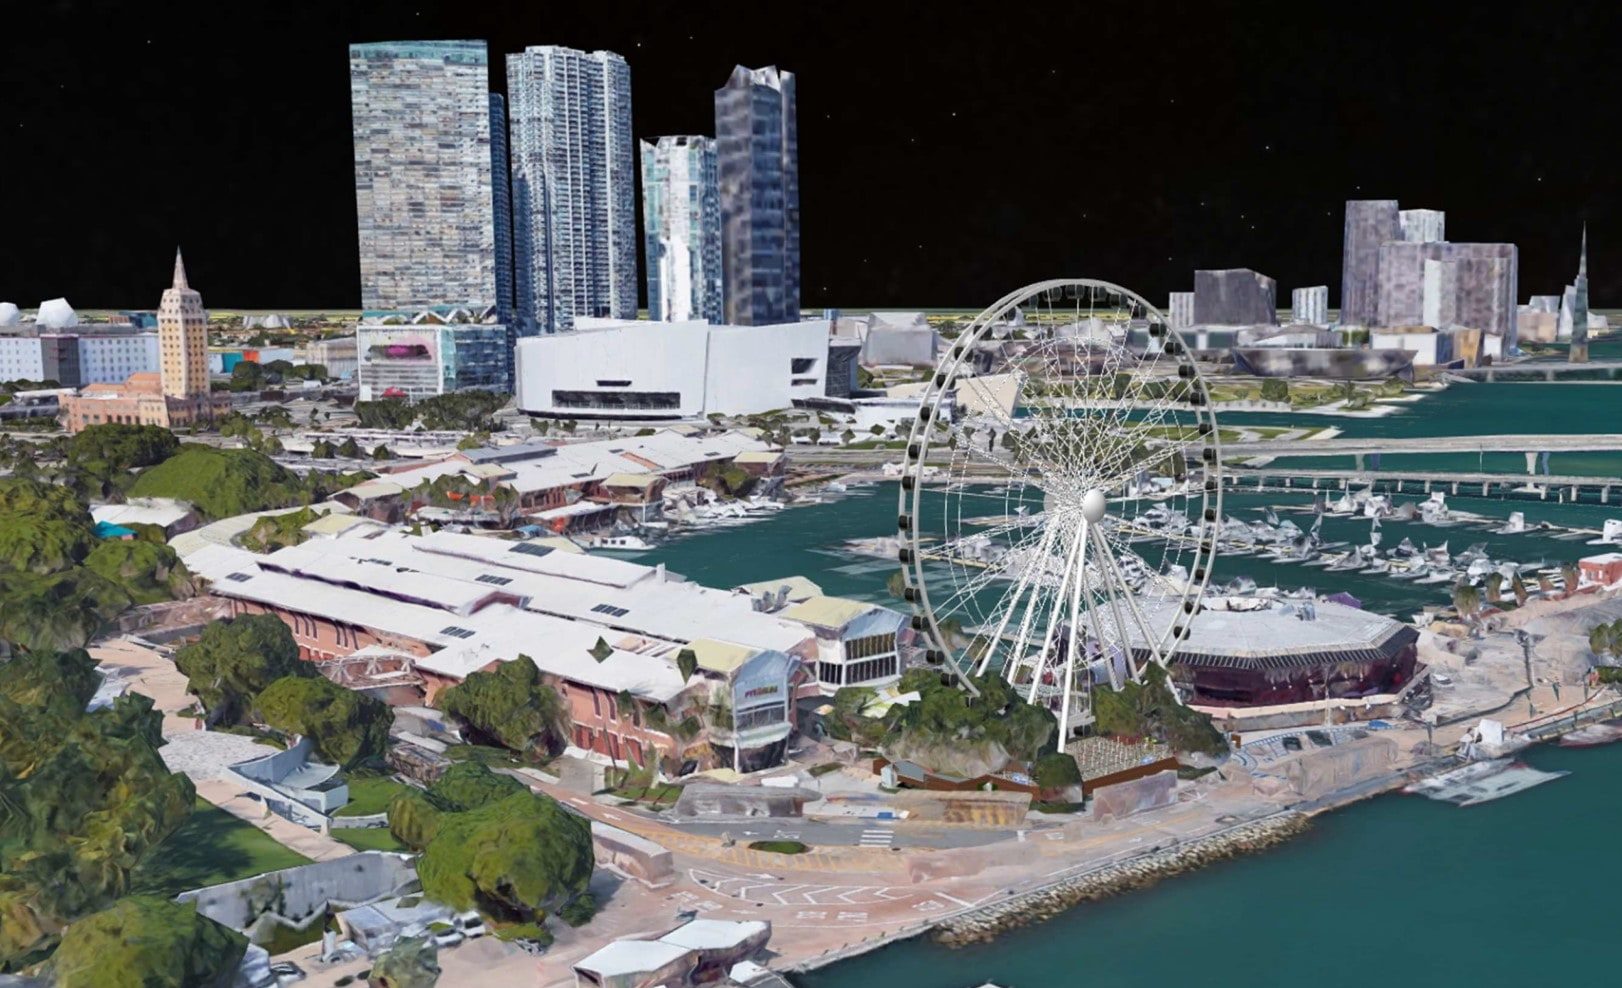 Downtown Miami may soon have its own Ferris Wheel at Bayside Marketplace